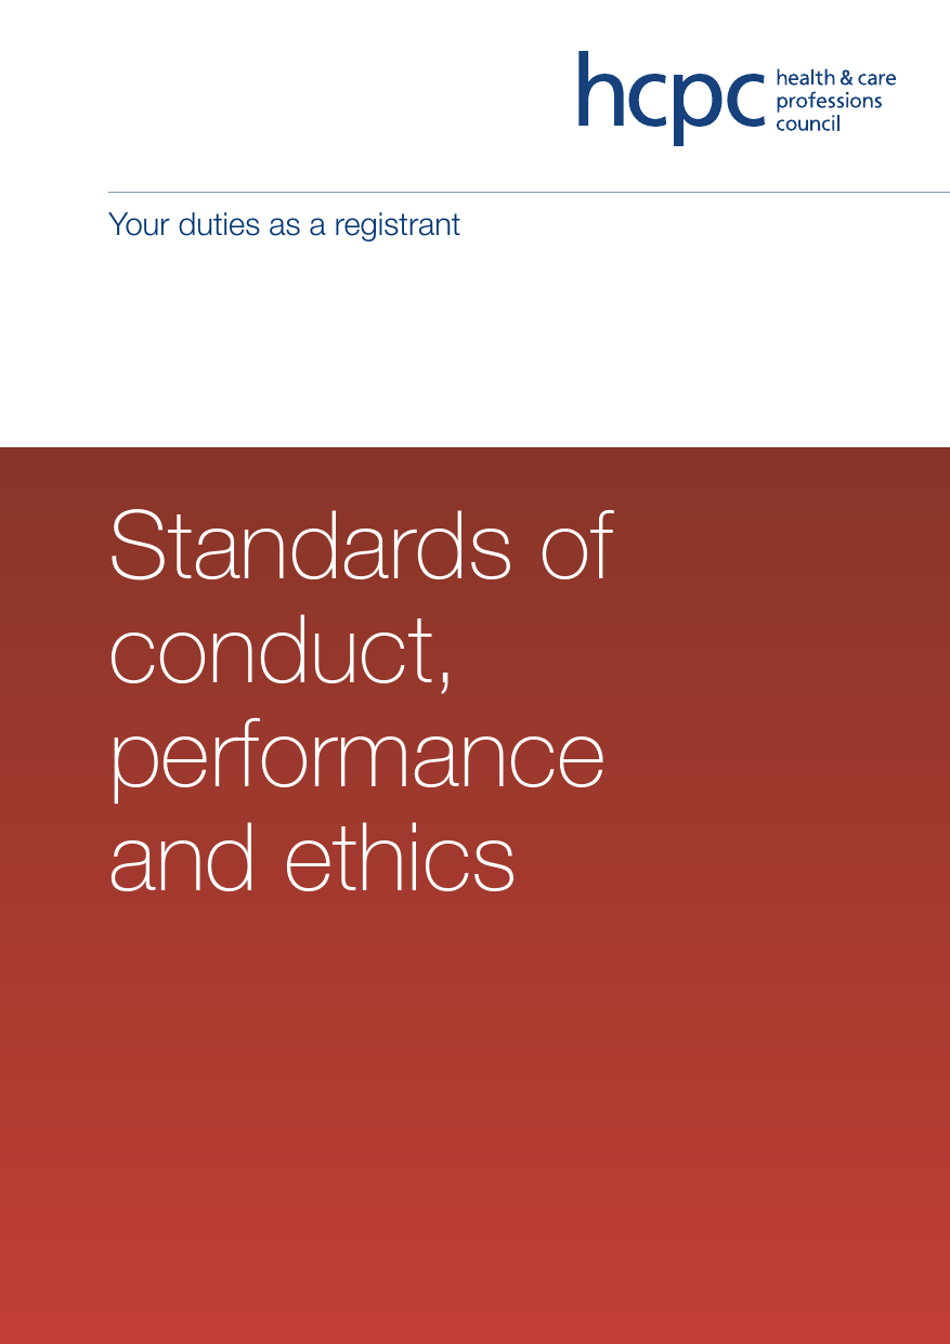 Standards of Conduct, Performance and Ethics document